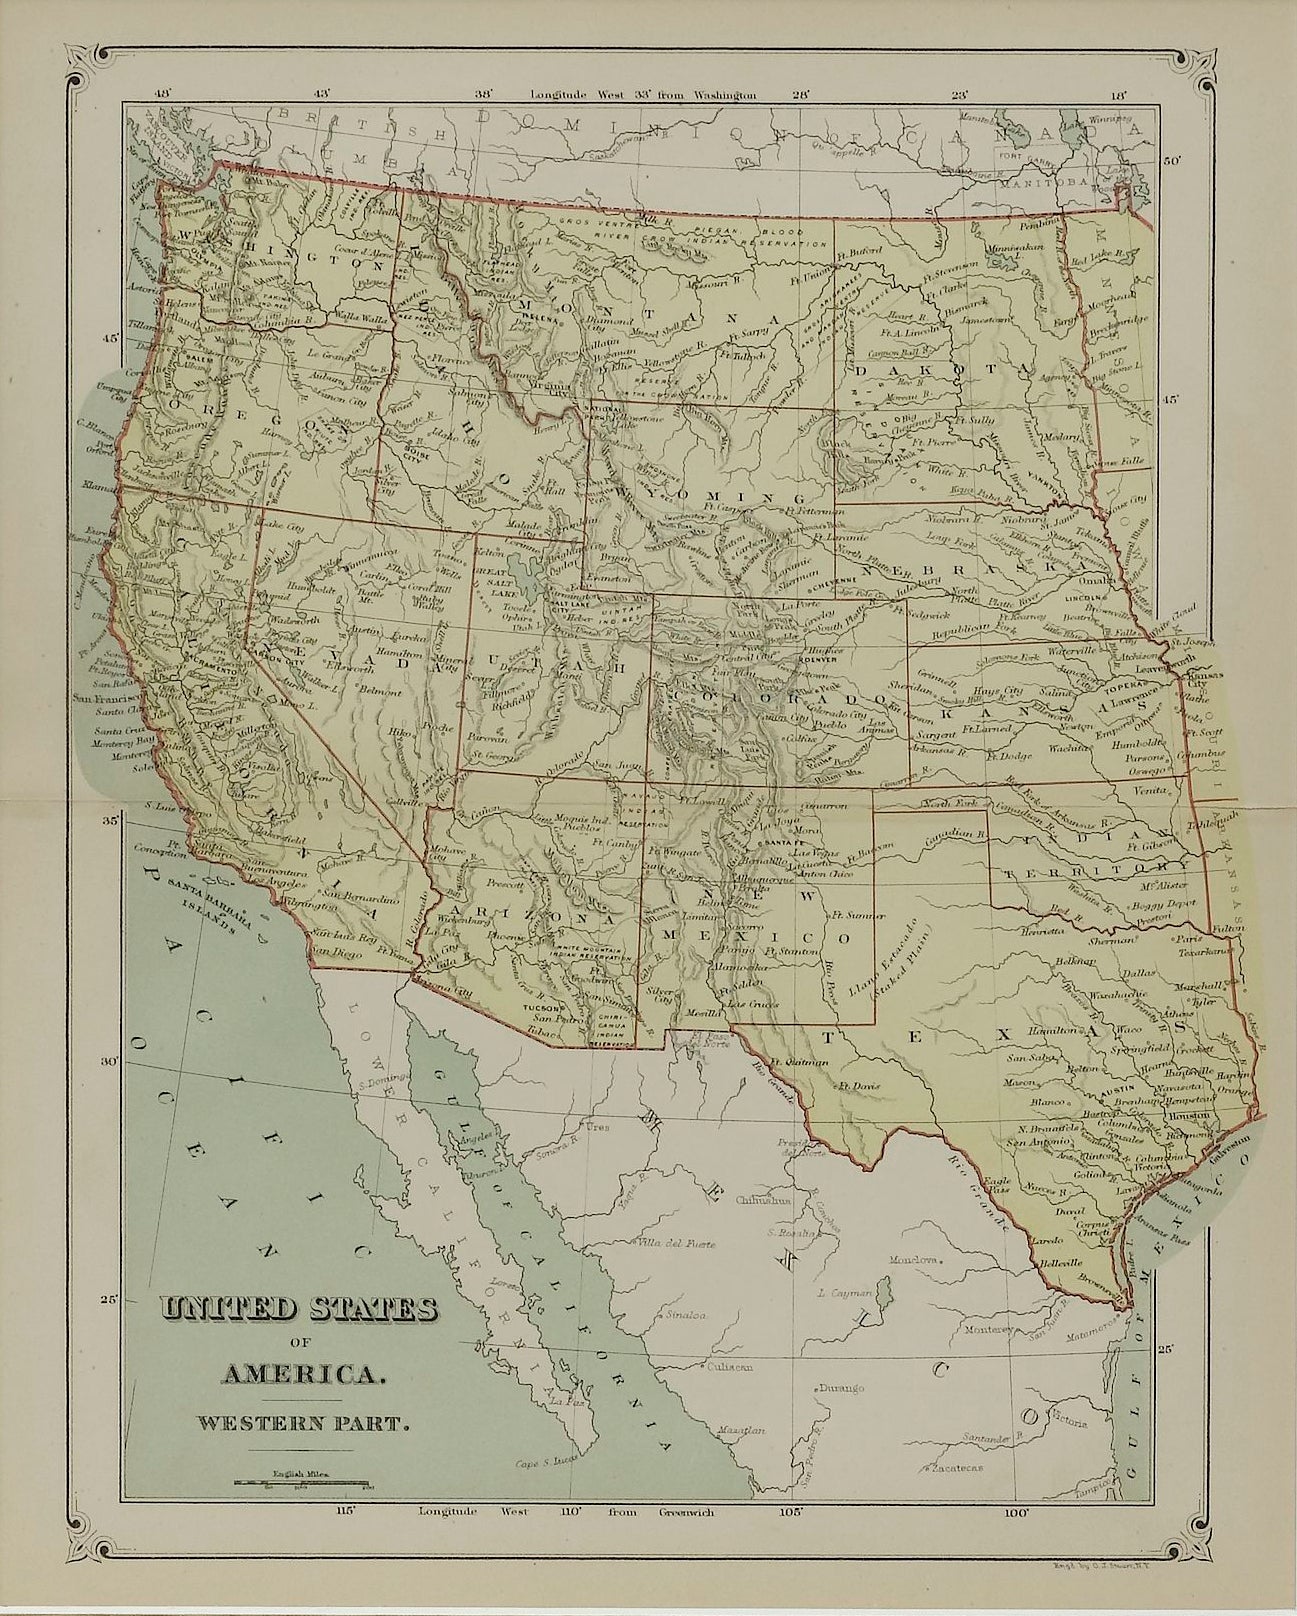 1879 "United States of America, Western Part" by O. J. Stuart - The Great Republic